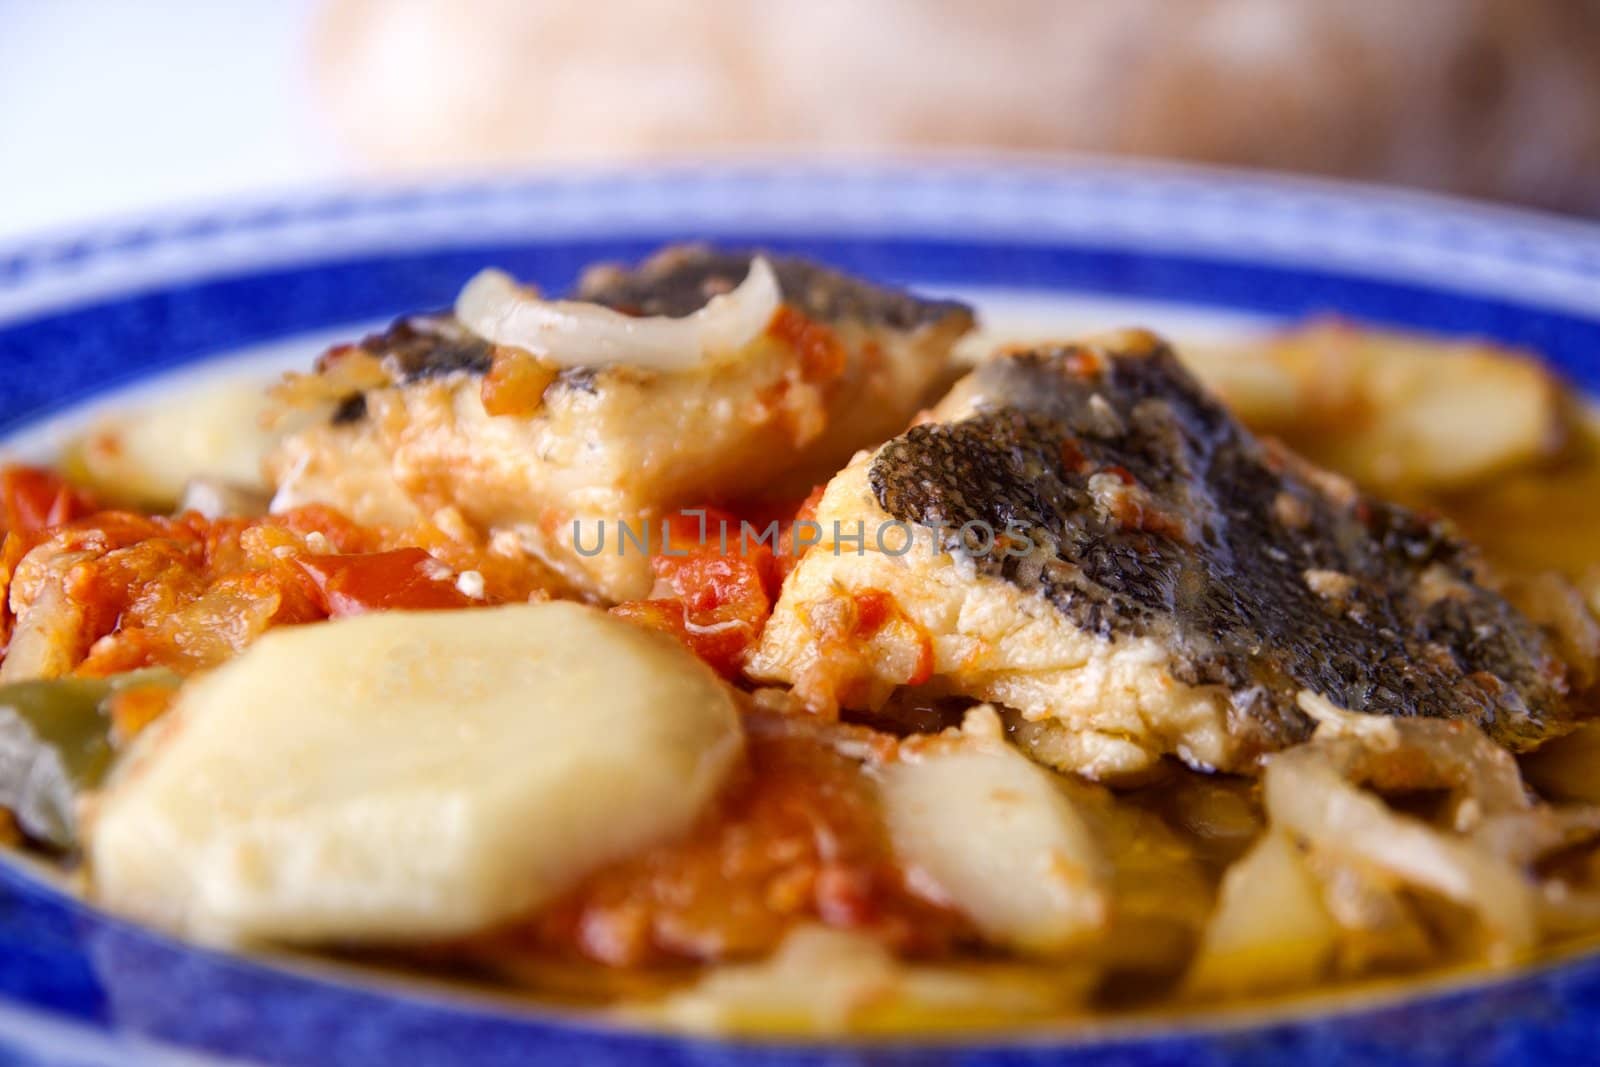 Close up view of a Portuguese meal of cod fish, potatoes and tomato.